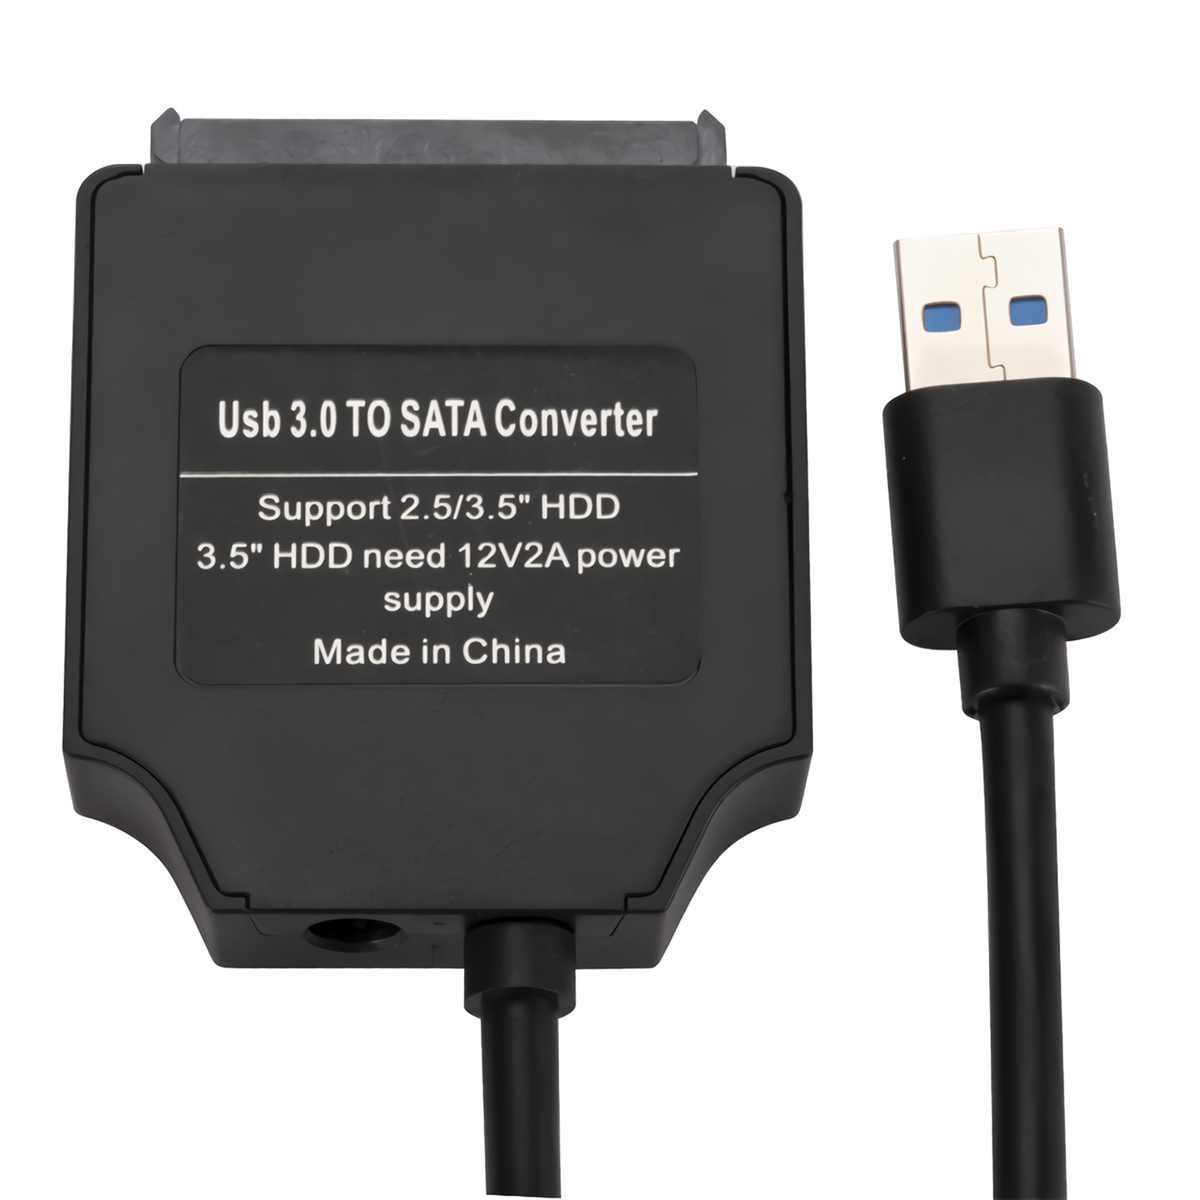 MnnWuu SSD HDD USB 3.0 to SATA Converter Cable Hard Drive Converter Adapter Support 2.5 / 3.5